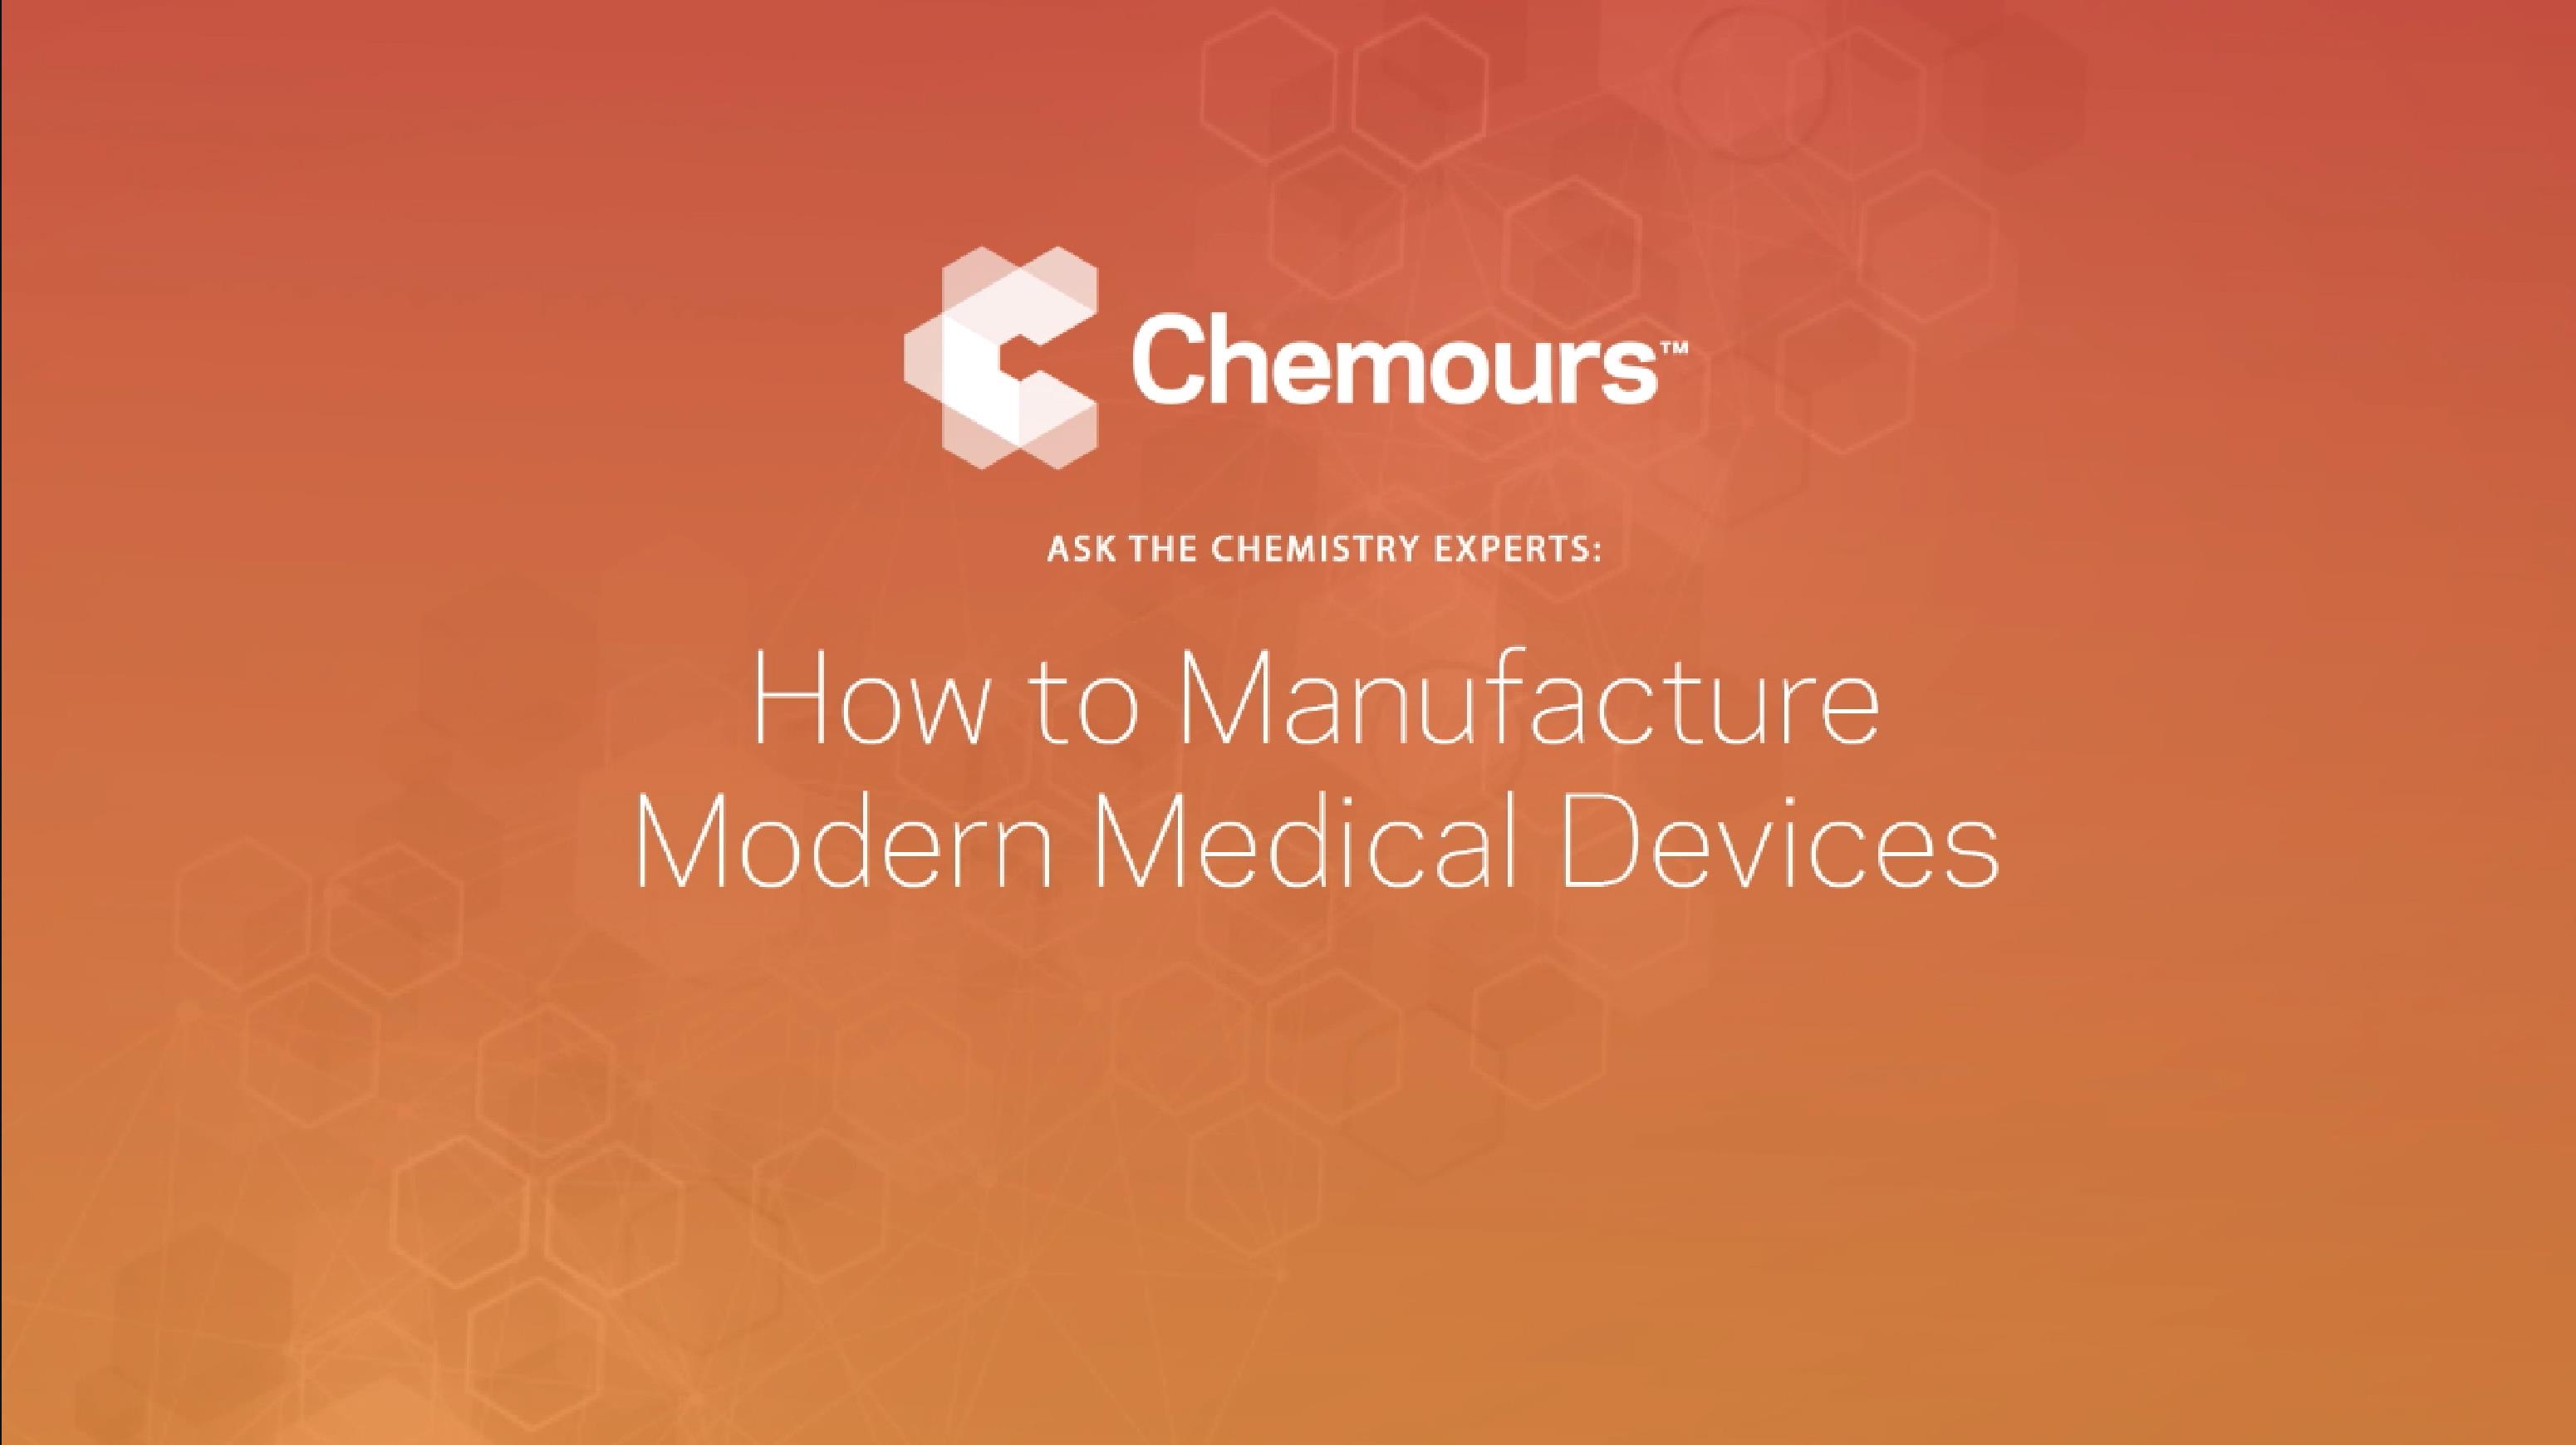 How to Manufacture Modern Medical Devices